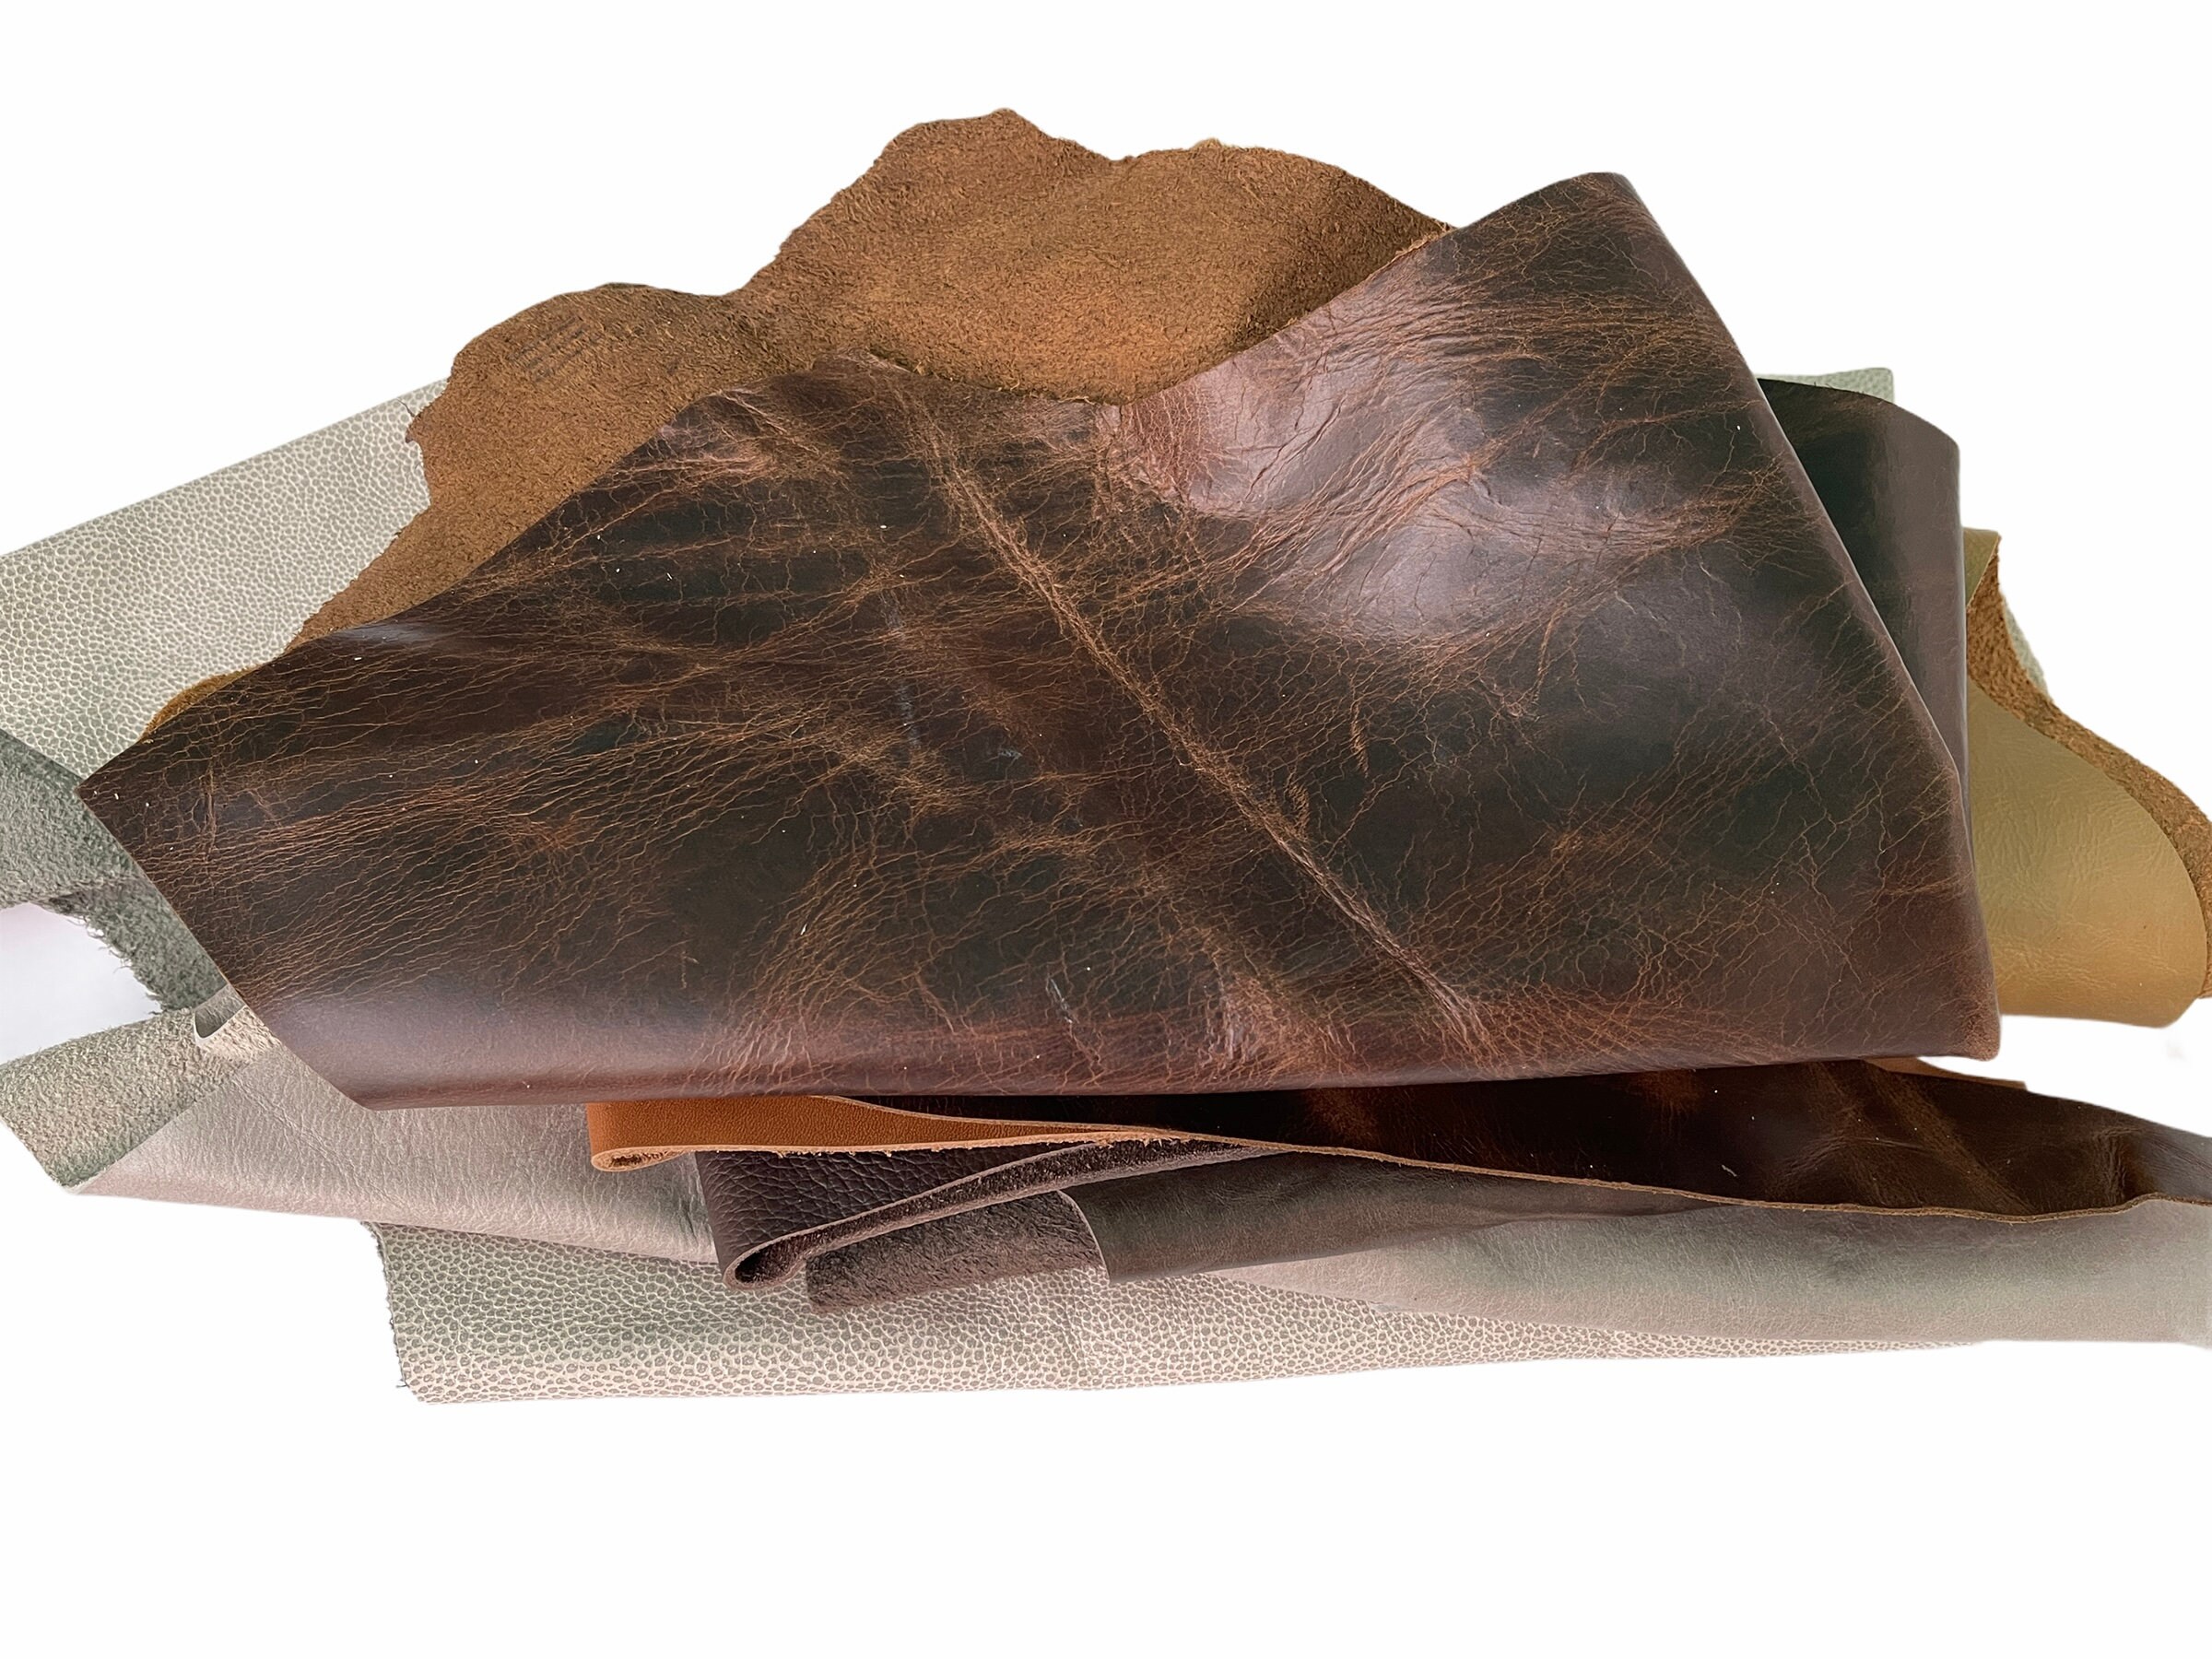 Leather Scraps, Vegetable tanned leather, Waxed Leather, 2Kg Leather  off-cuts, Leather by kilo, Scrap leather for sale, Leather Remnants